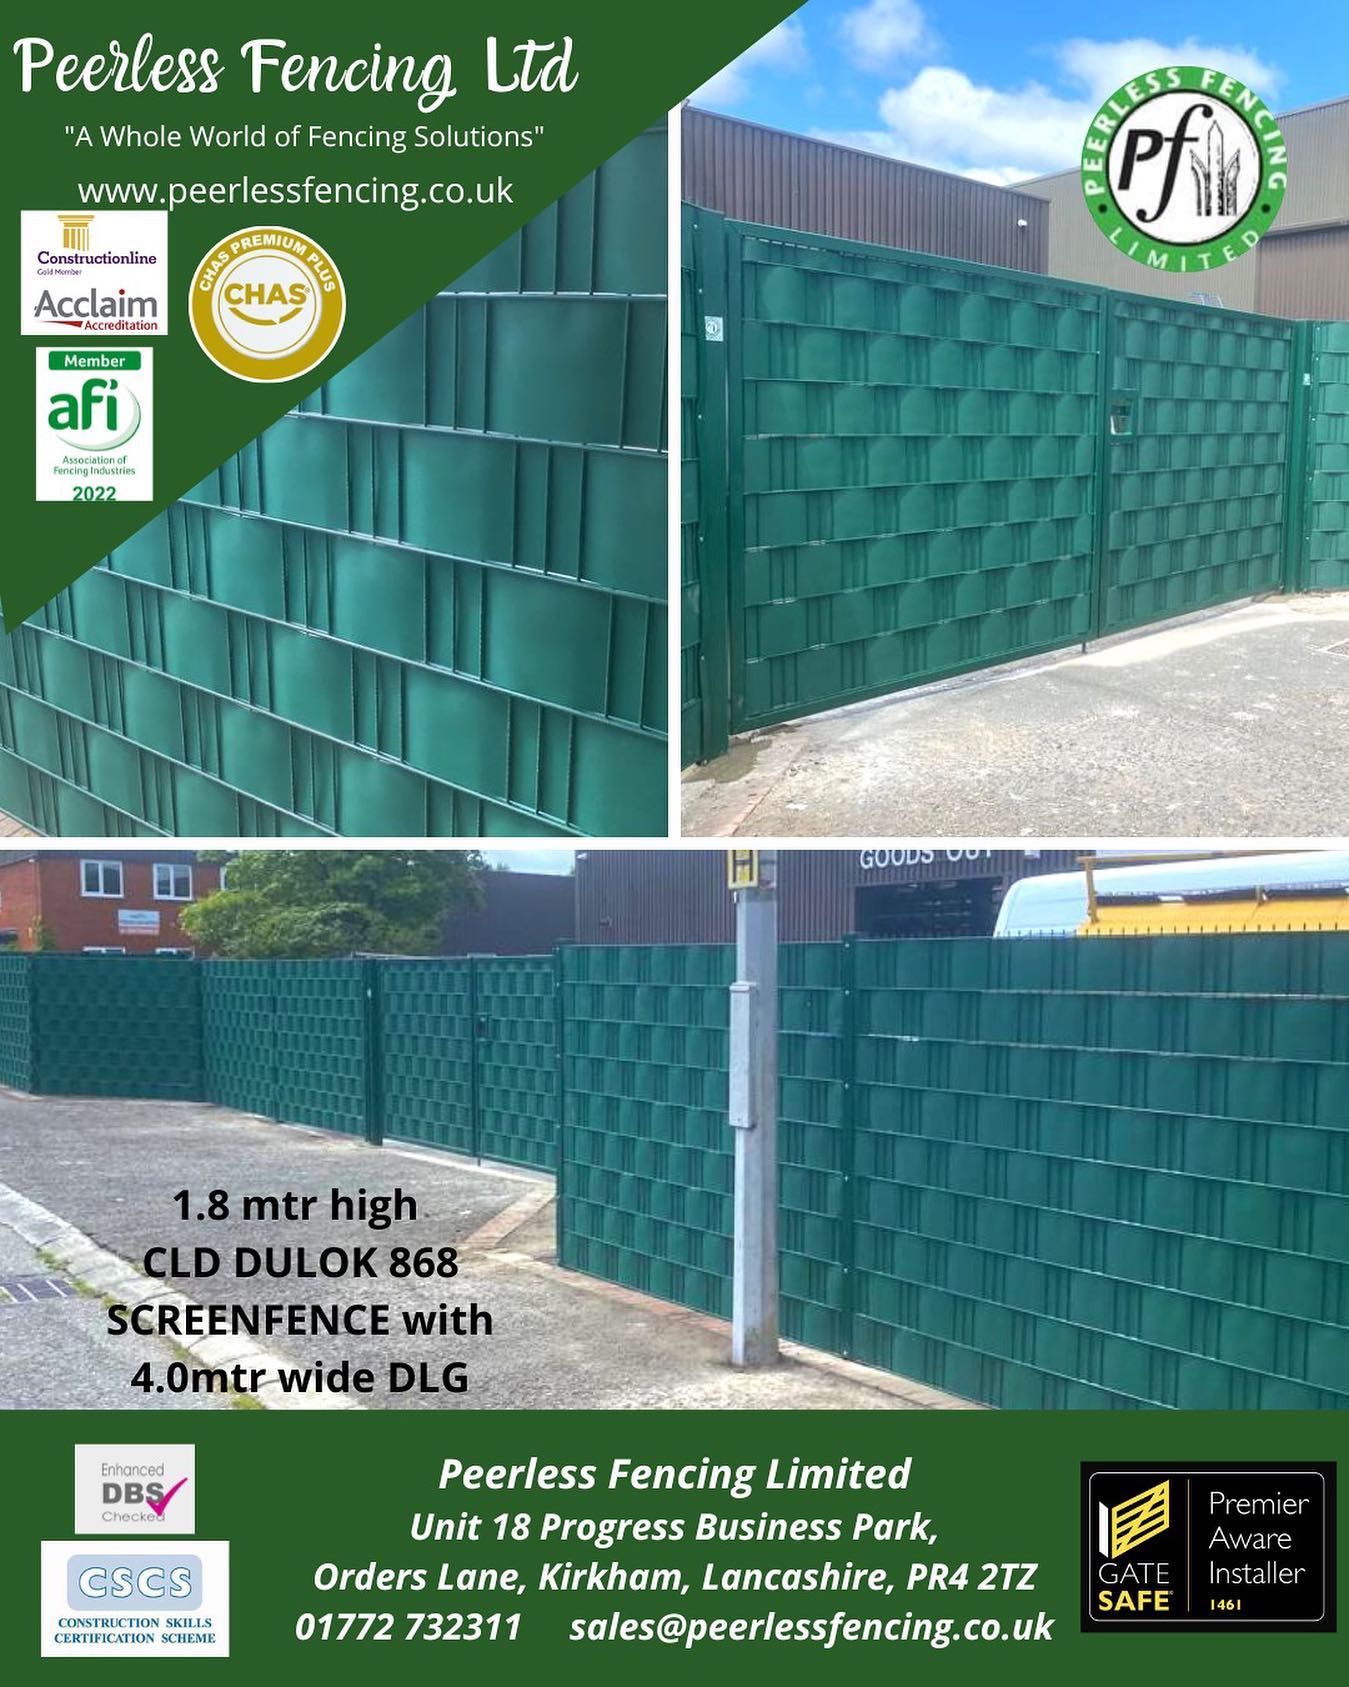 This ScreenFence installation looks amazing 🤩. Providing the customers property with the privacy they need combined with an aesthetically pleasing fence. #screenfence #privacyfence #fencingcontractornorthwest #commercialfencing